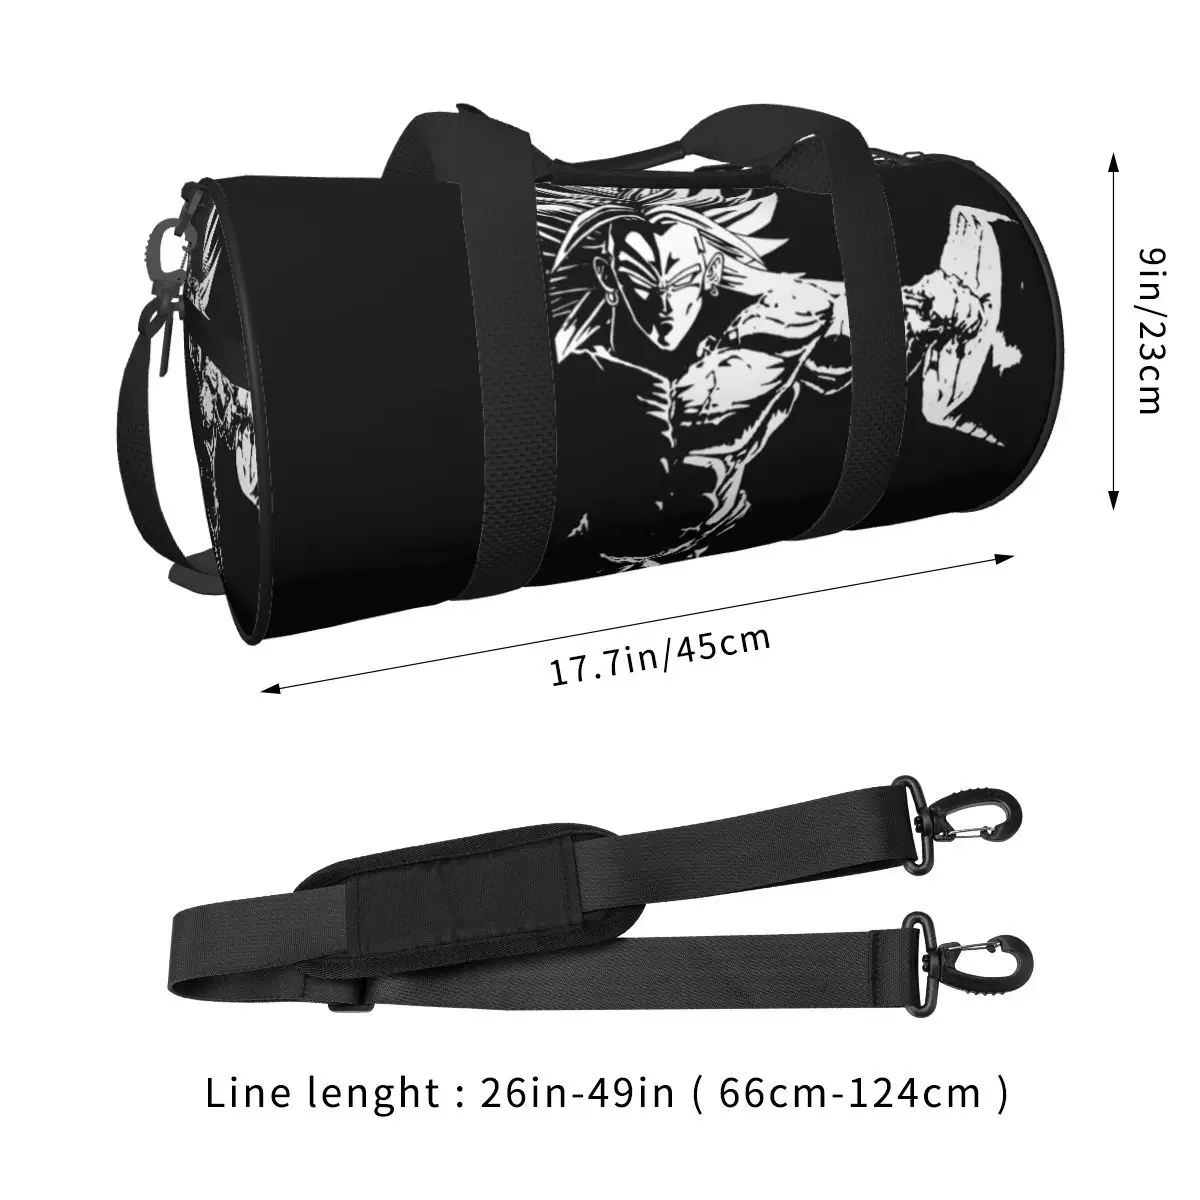 Anime Gym Motivational Sports Bags Funny Luggage Gym Bag with Shoes Cute Handbags Men's Design Waterproof Fitness Bag